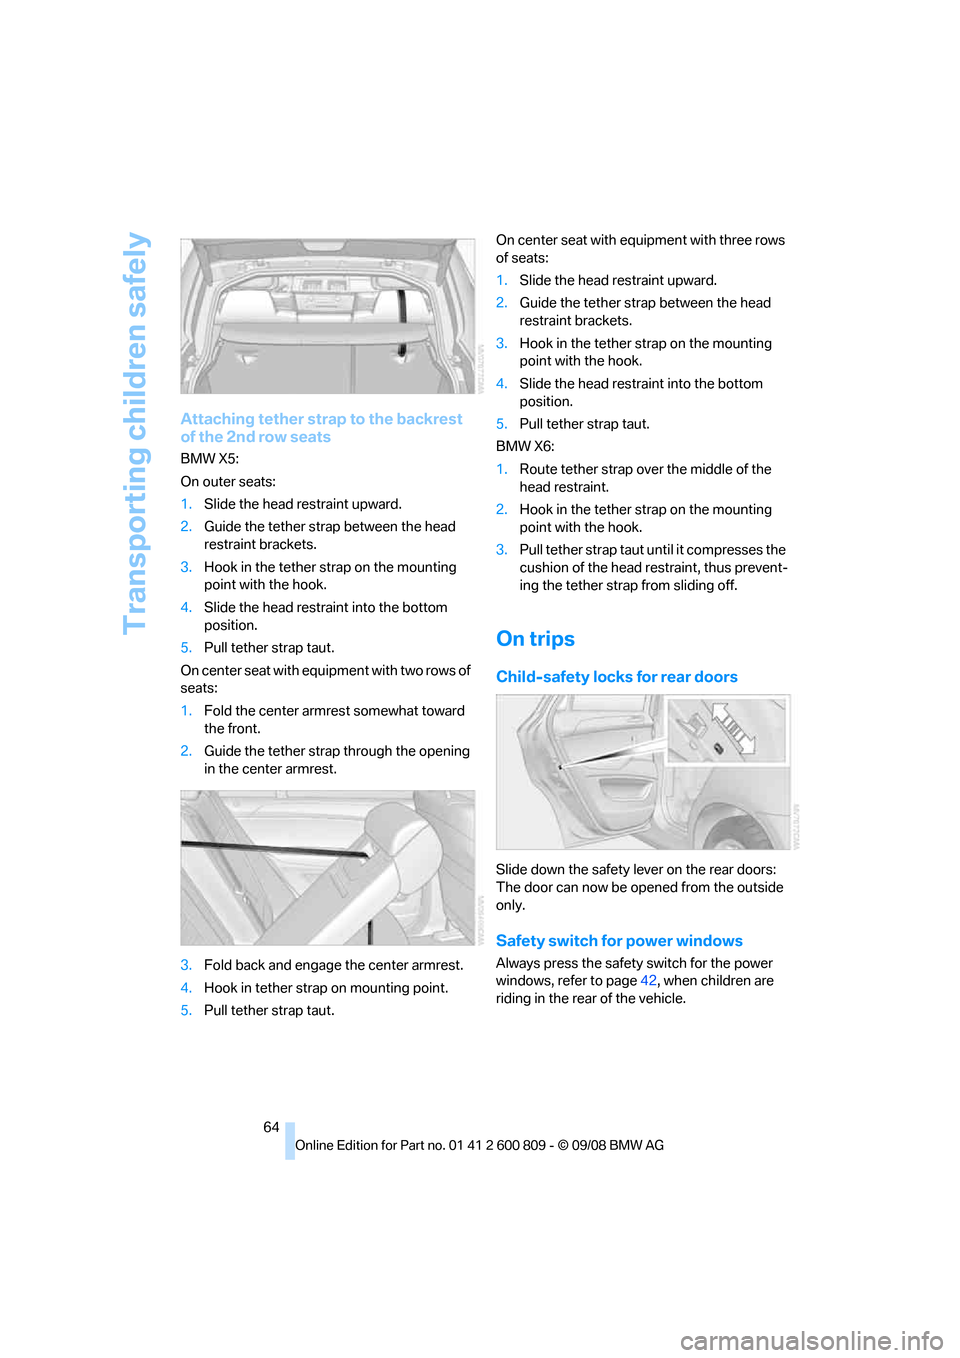 BMW X6 XDRIVE 2009 E71 Owners Guide Transporting children safely
64
Attaching tether strap to the backrest 
of the 2nd row seats
BMW X5:
On outer seats:
1.Slide the head re straint upward.
2. Guide the tether stra p between the head 
re